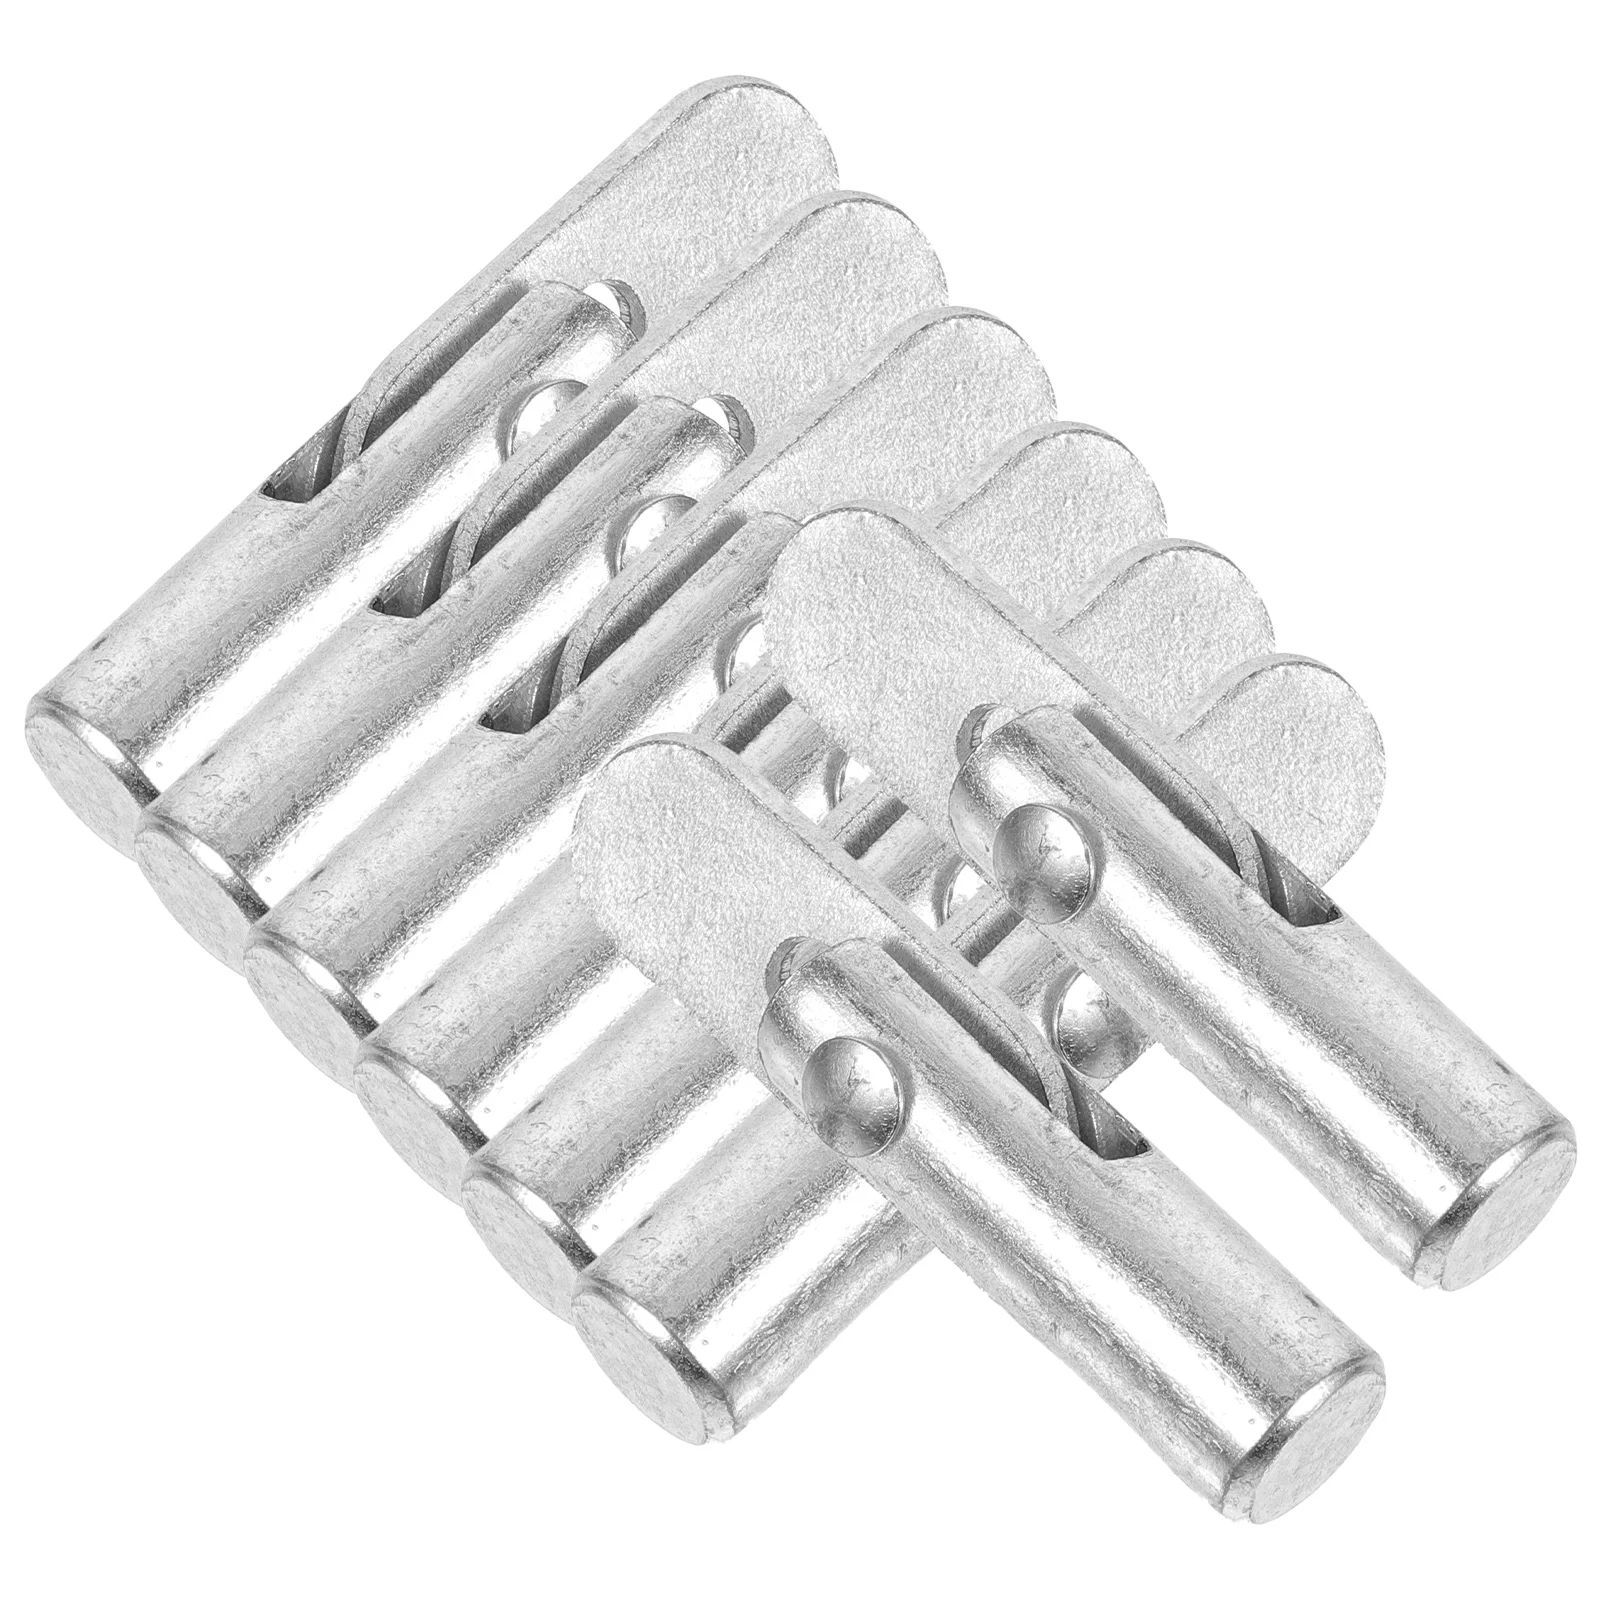 

Scaffolding Locking Pin Small Pull Galvanized Fixed Pin Connecting Rod Insert Pin Locking Cotter Parts Replacement